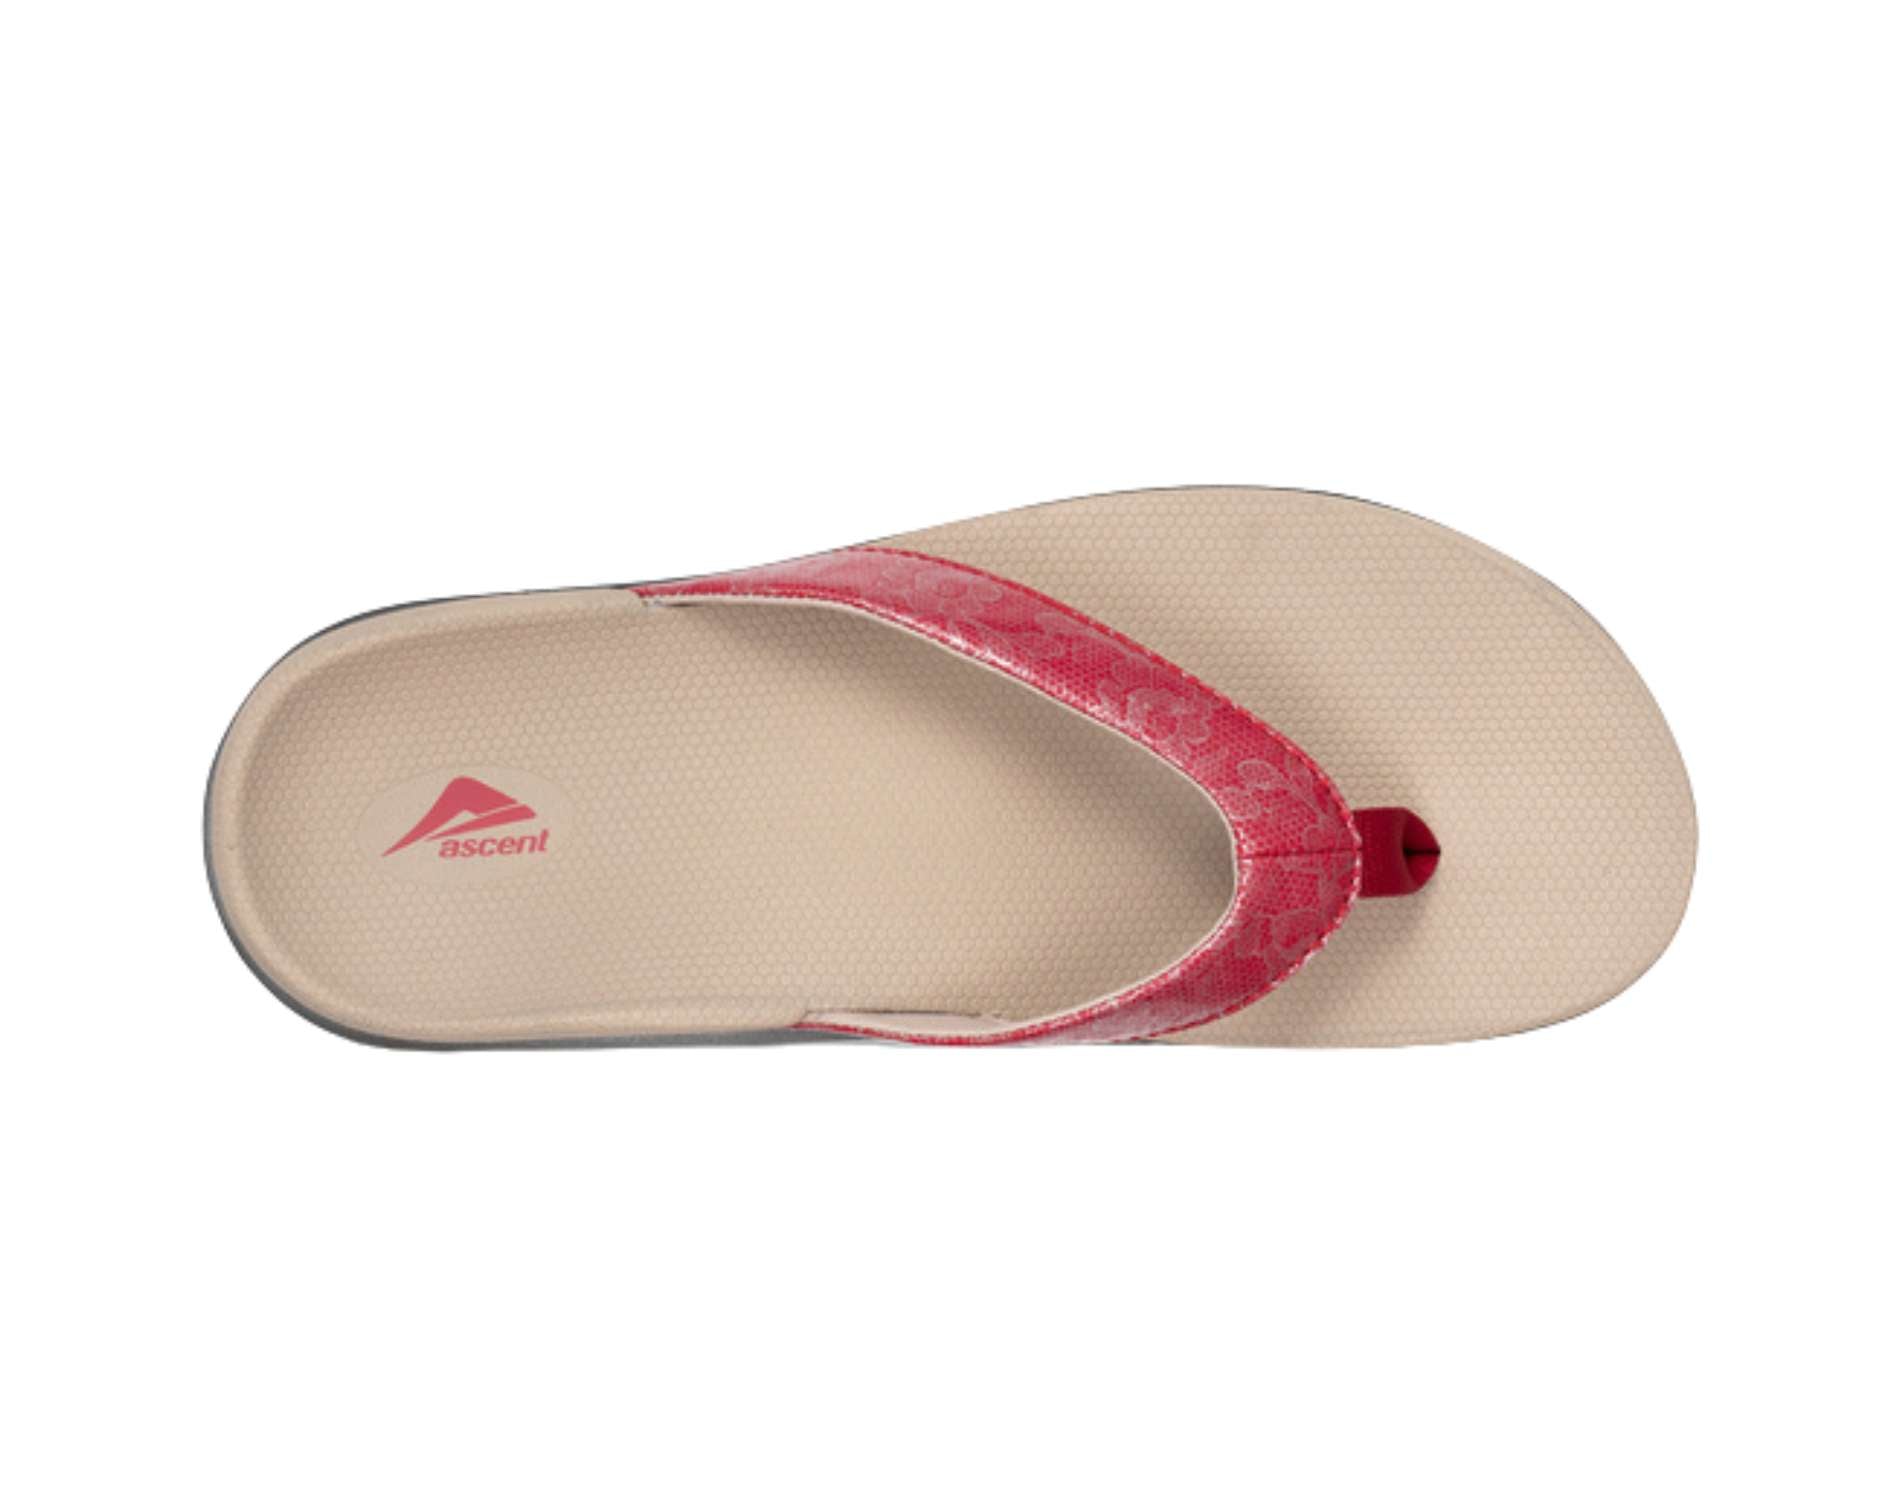 Ascent's Groove sandals for women in red tan colour